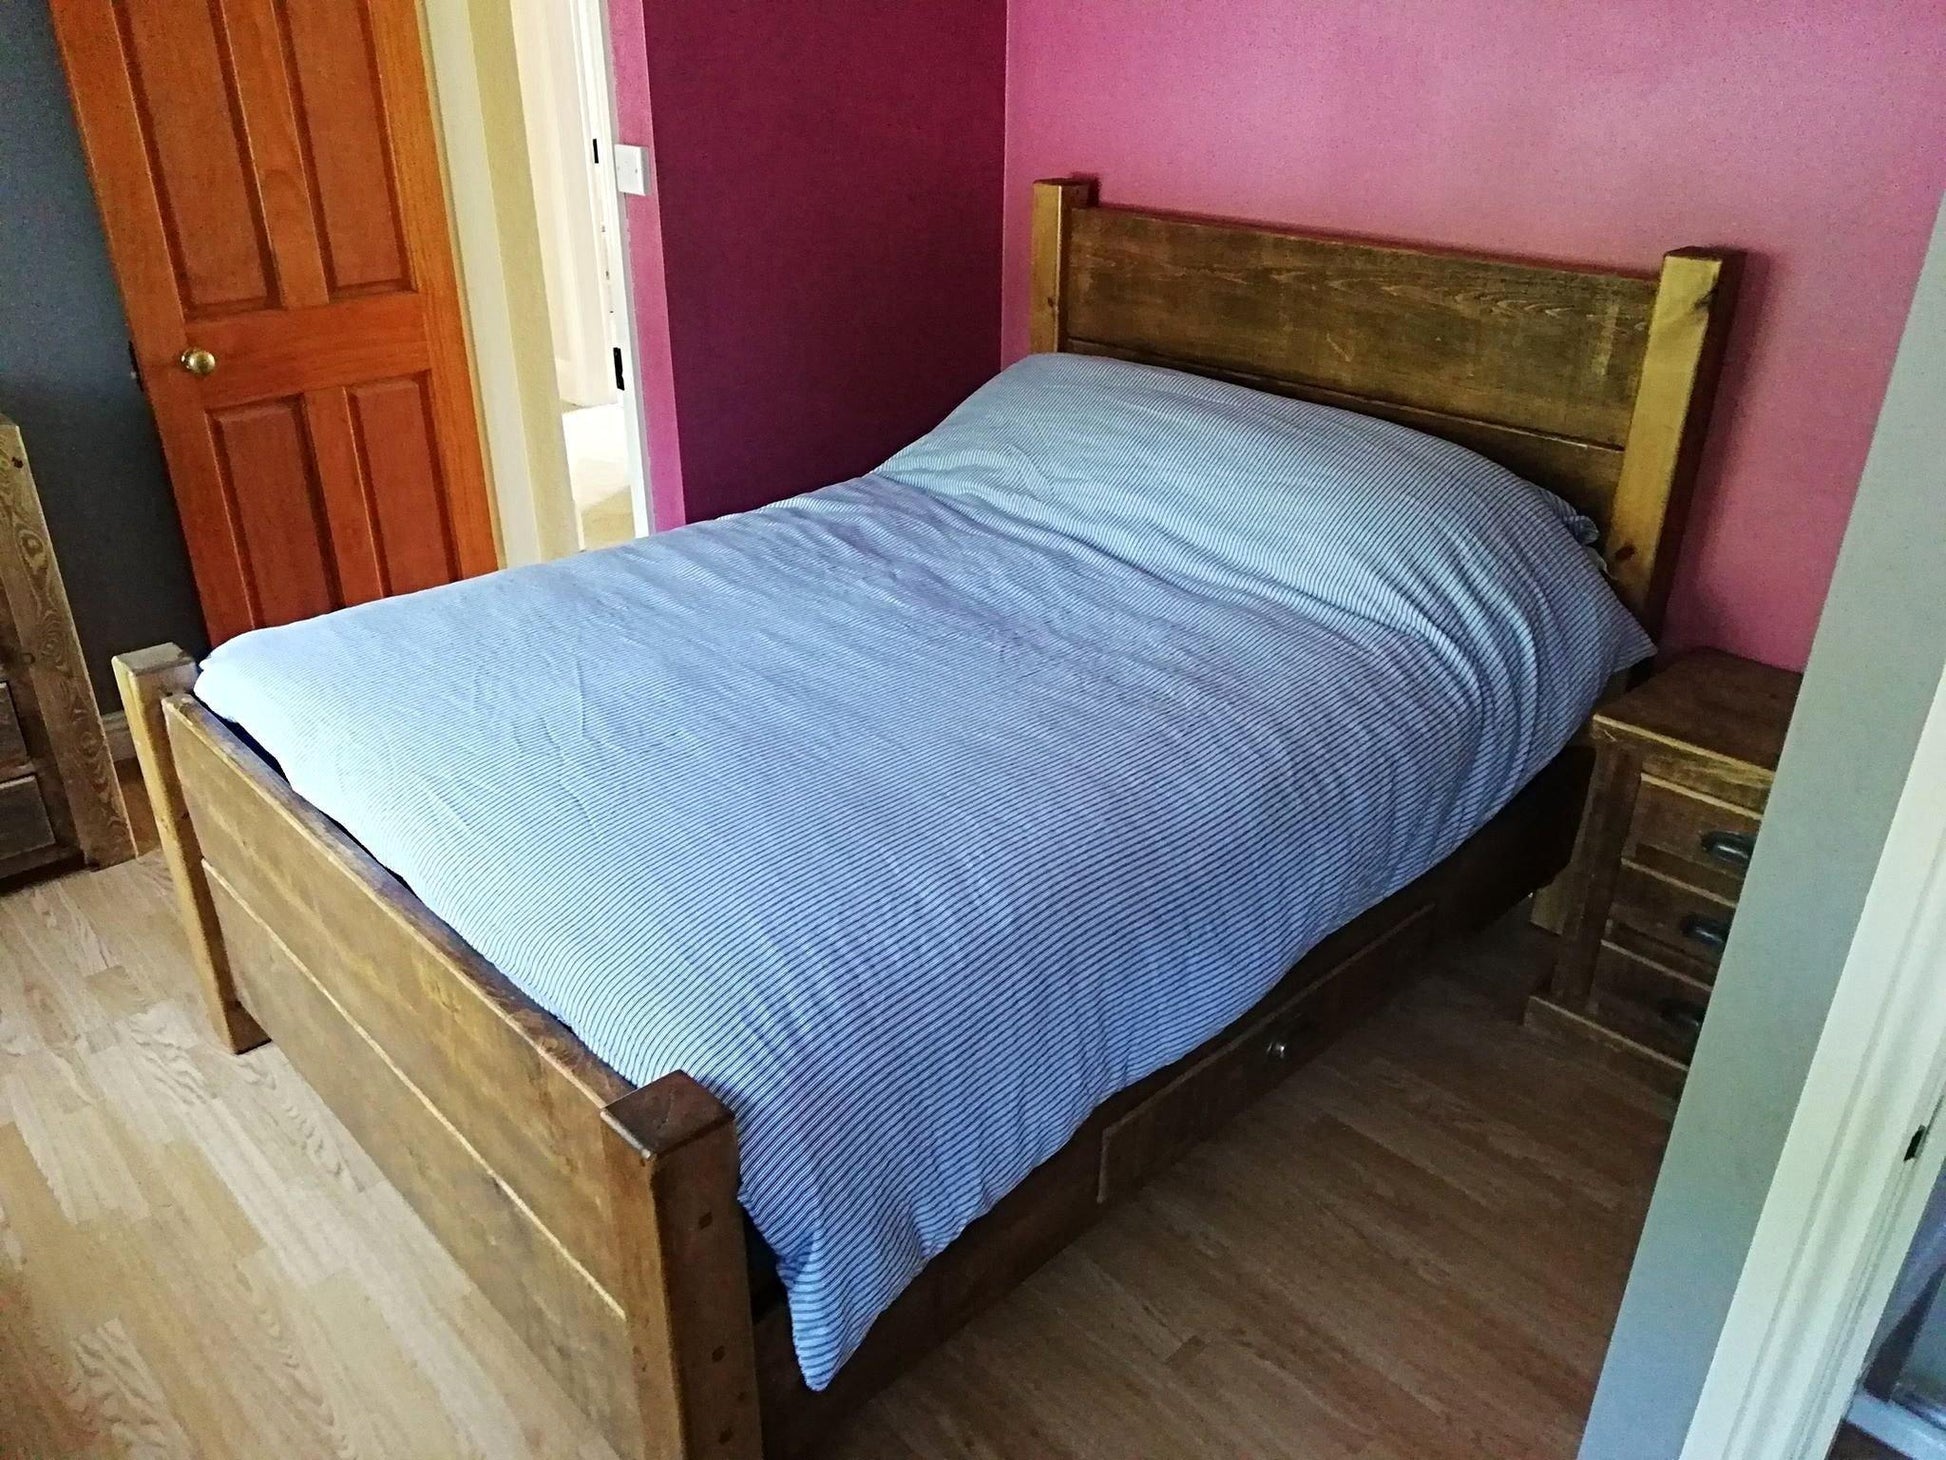 The Covent Solid Wood Rustic Plank Bed.